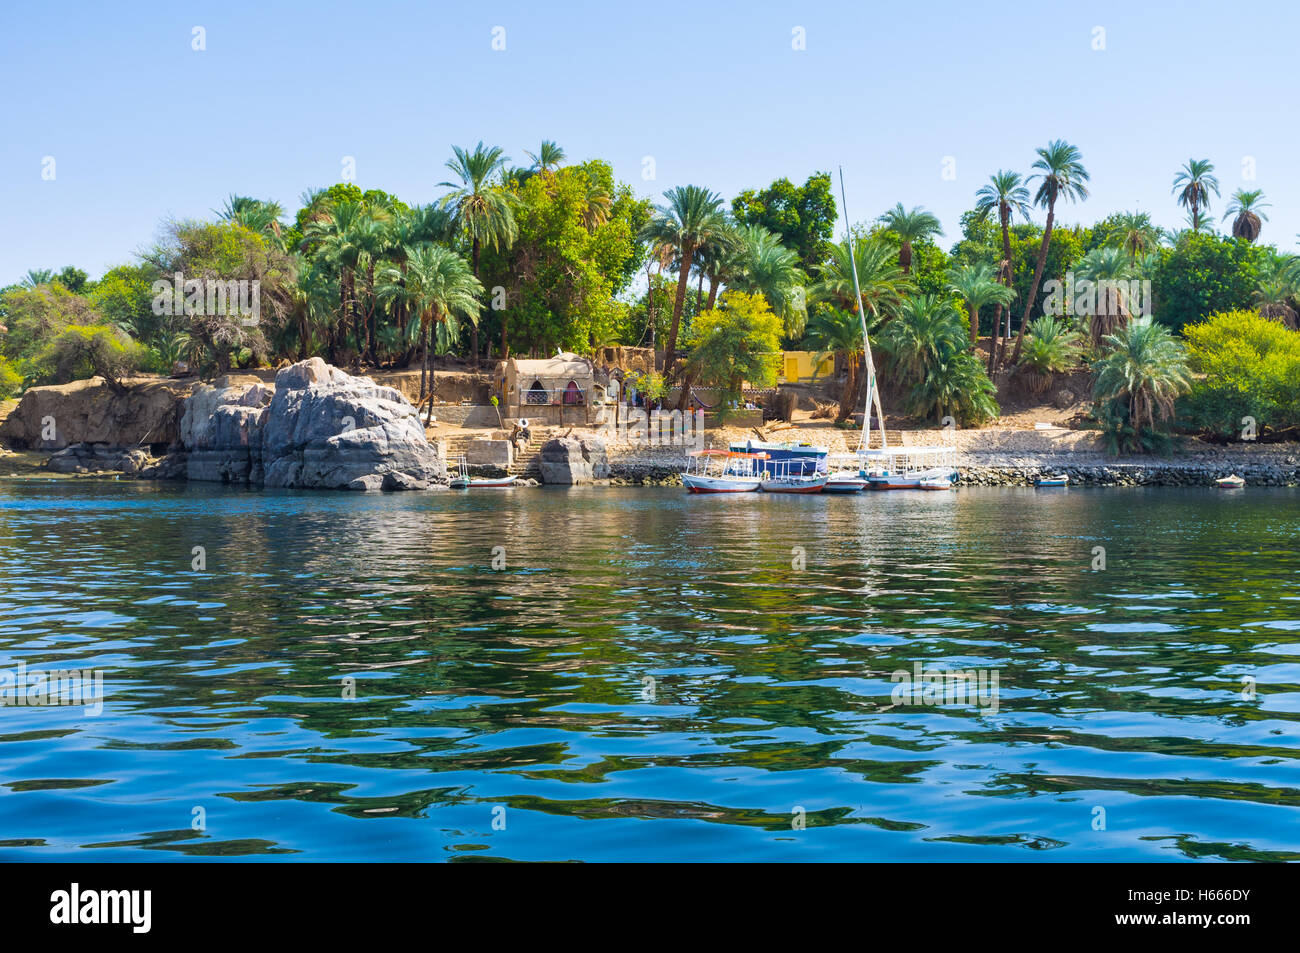 The Kitchener's island is also known as the Island of plants, it's popular tourist destination in Aswan, Egypt. Stock Photo